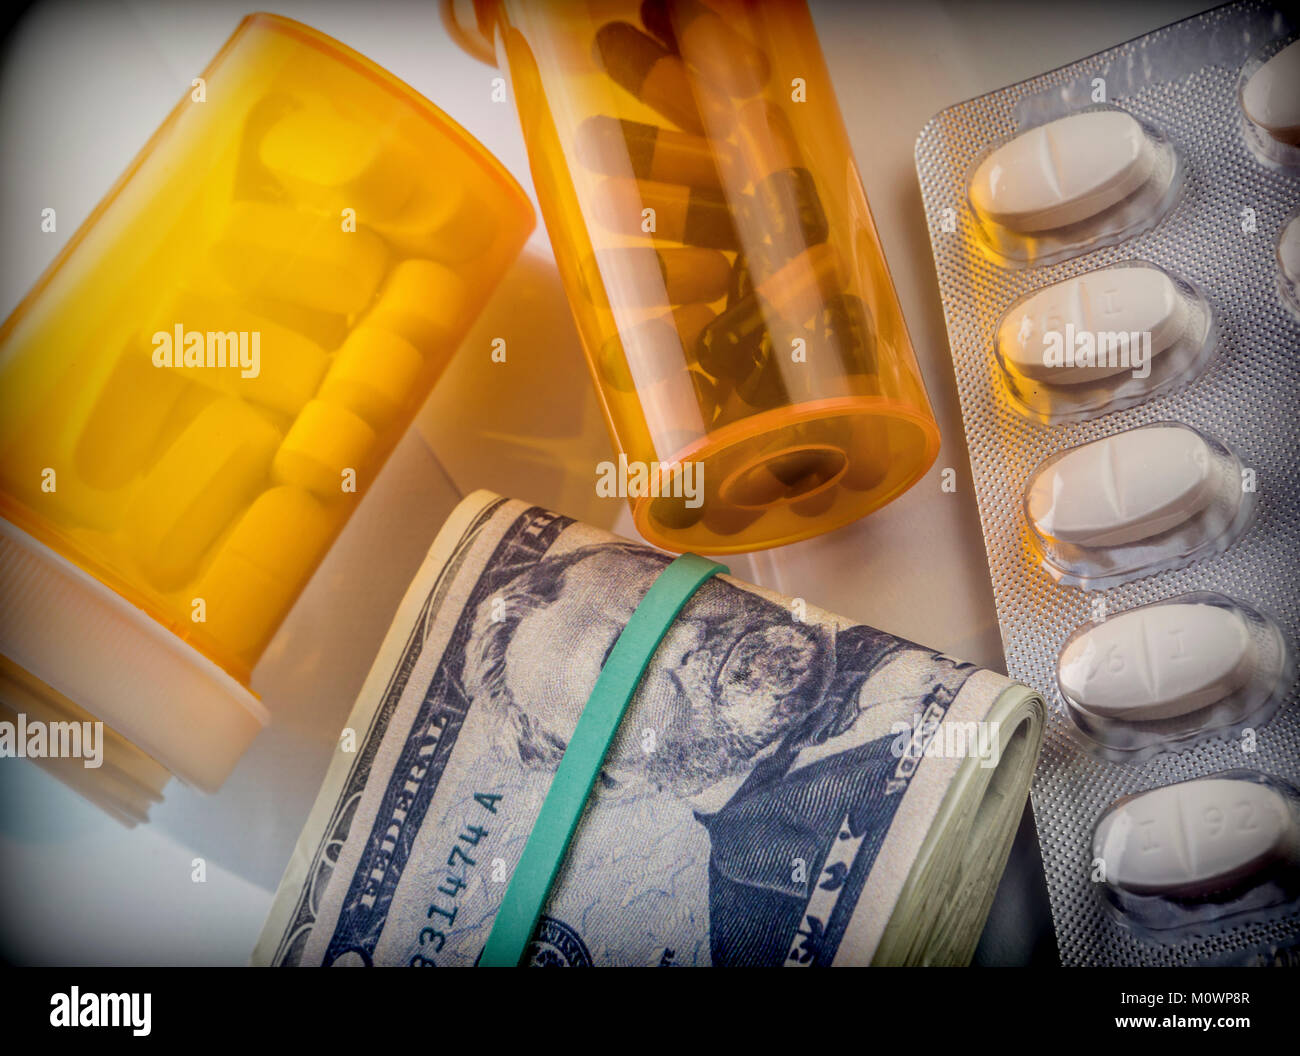 Some medicines next to a block of tickets of dollar, conceptual image Stock Photo